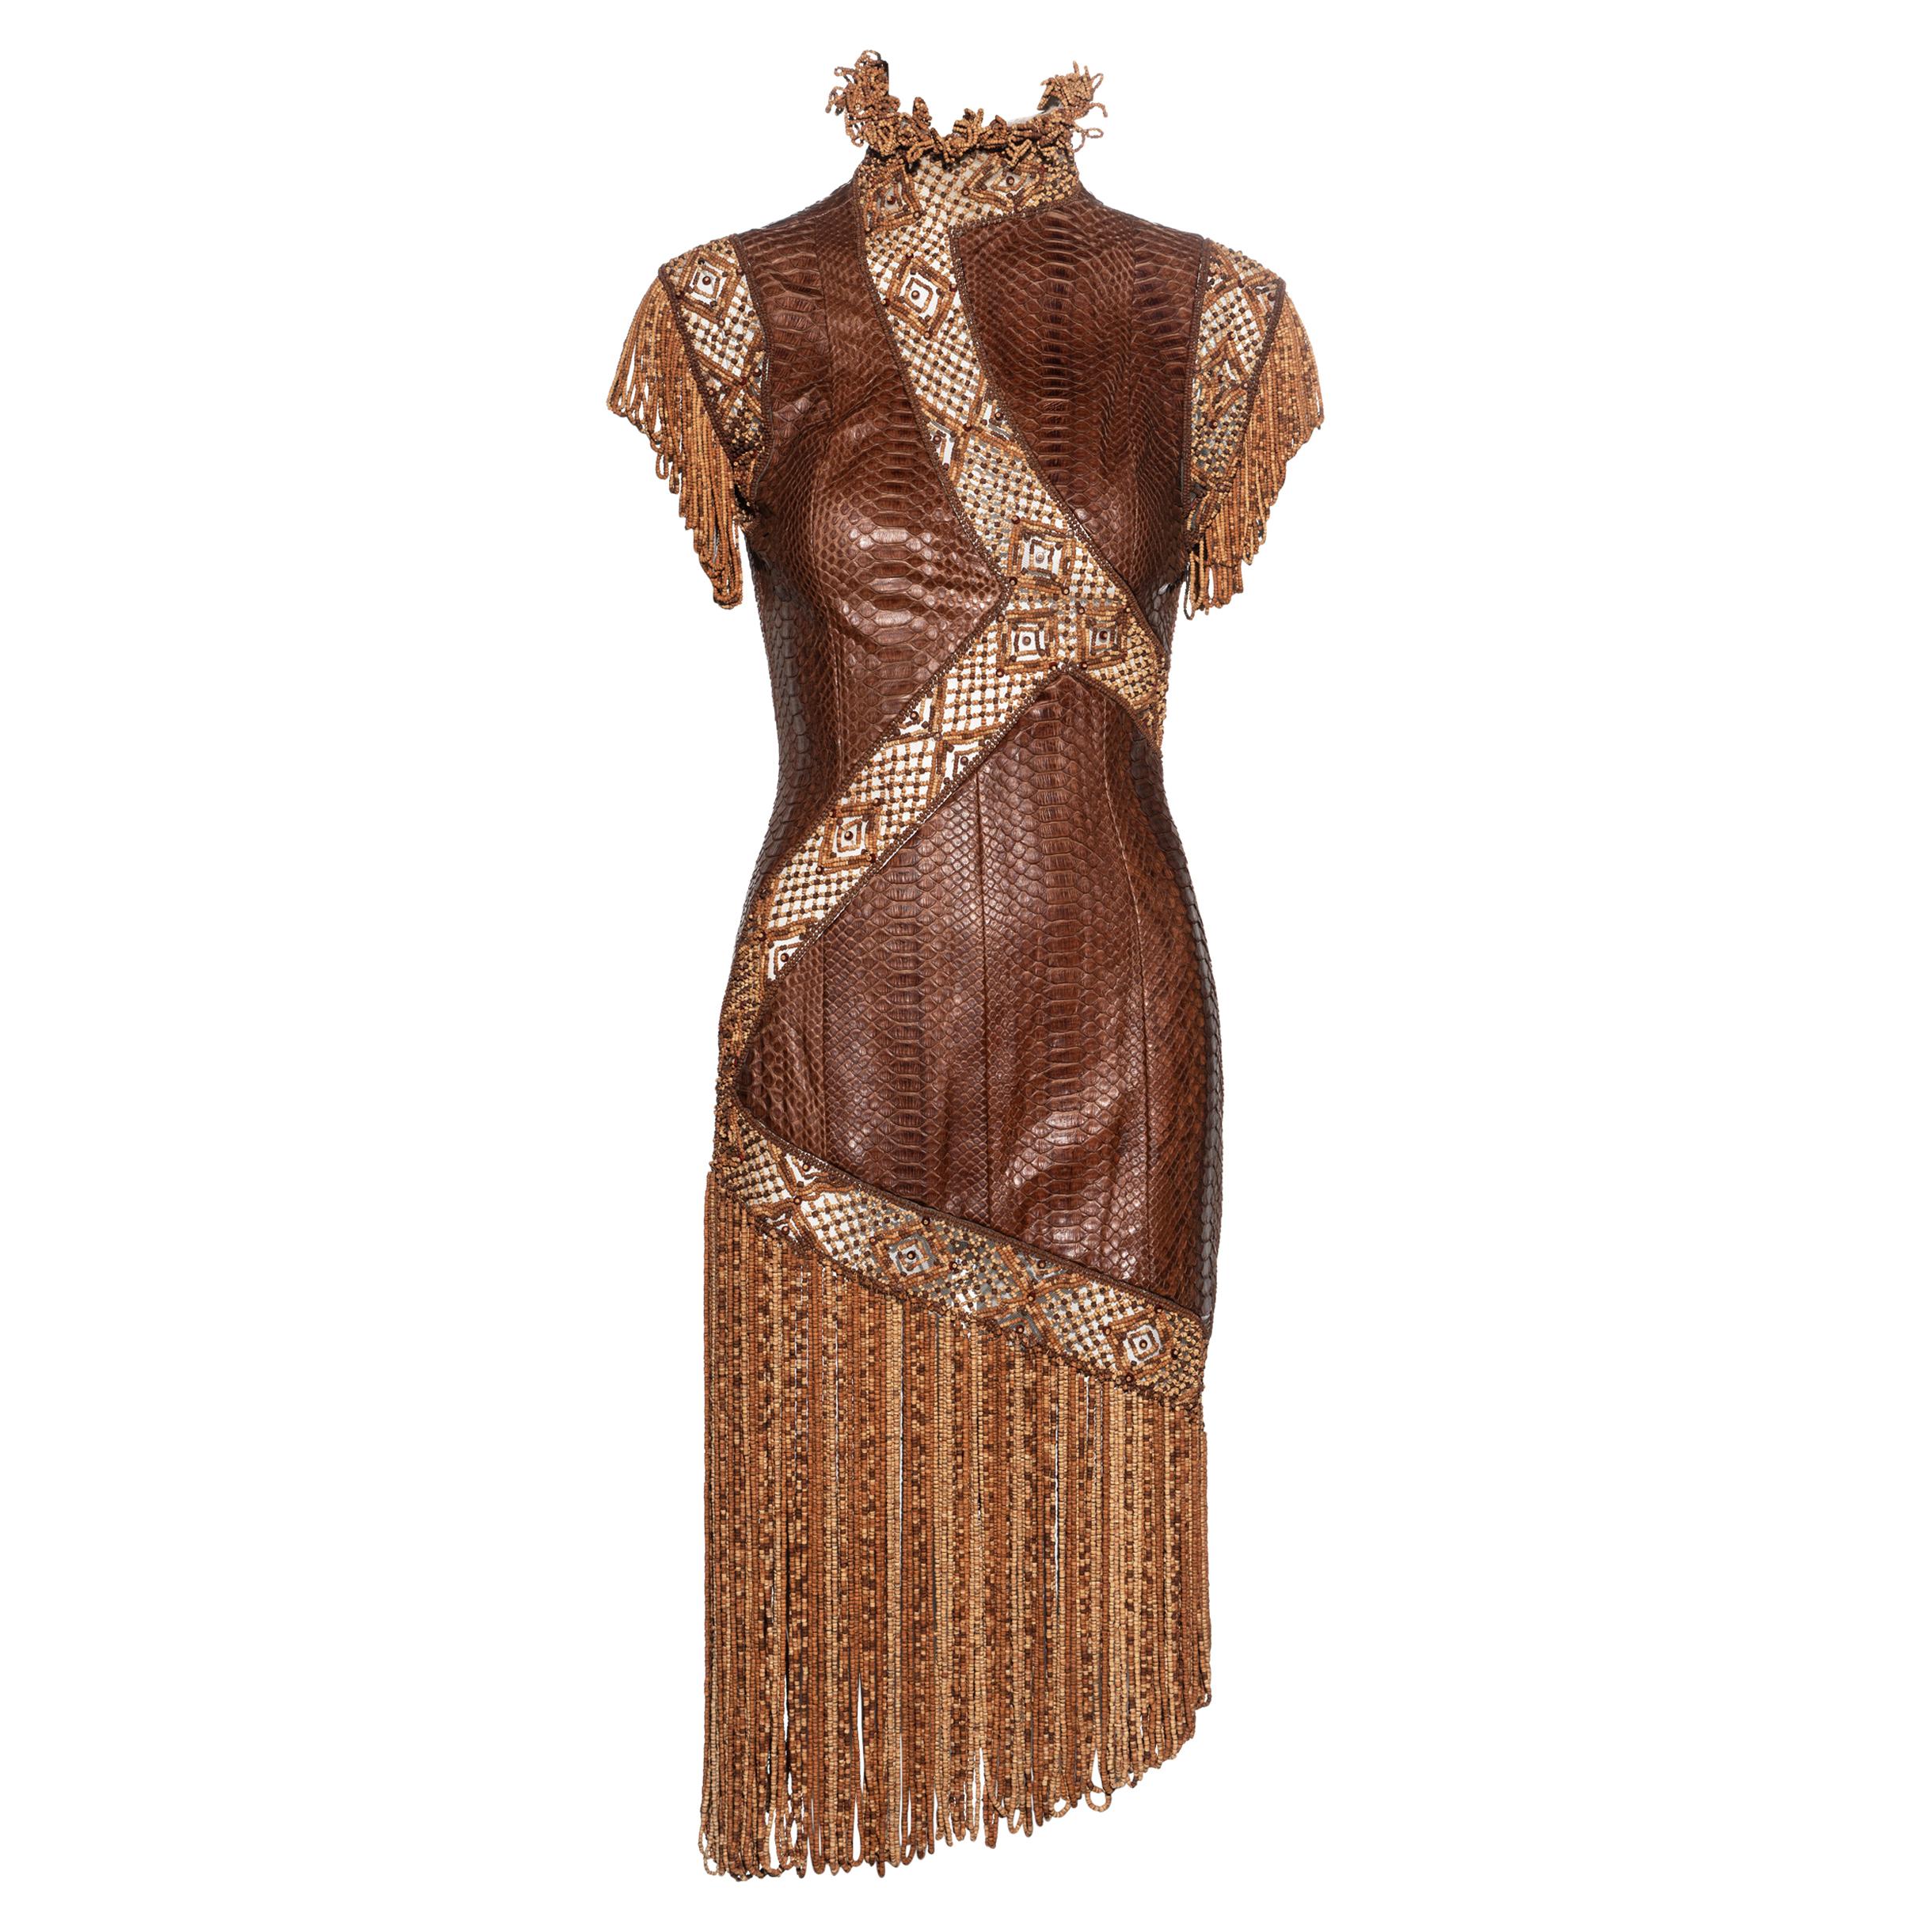 Givenchy by Alexander McQueen Haute Couture brown snakeskin dress, ss 2001